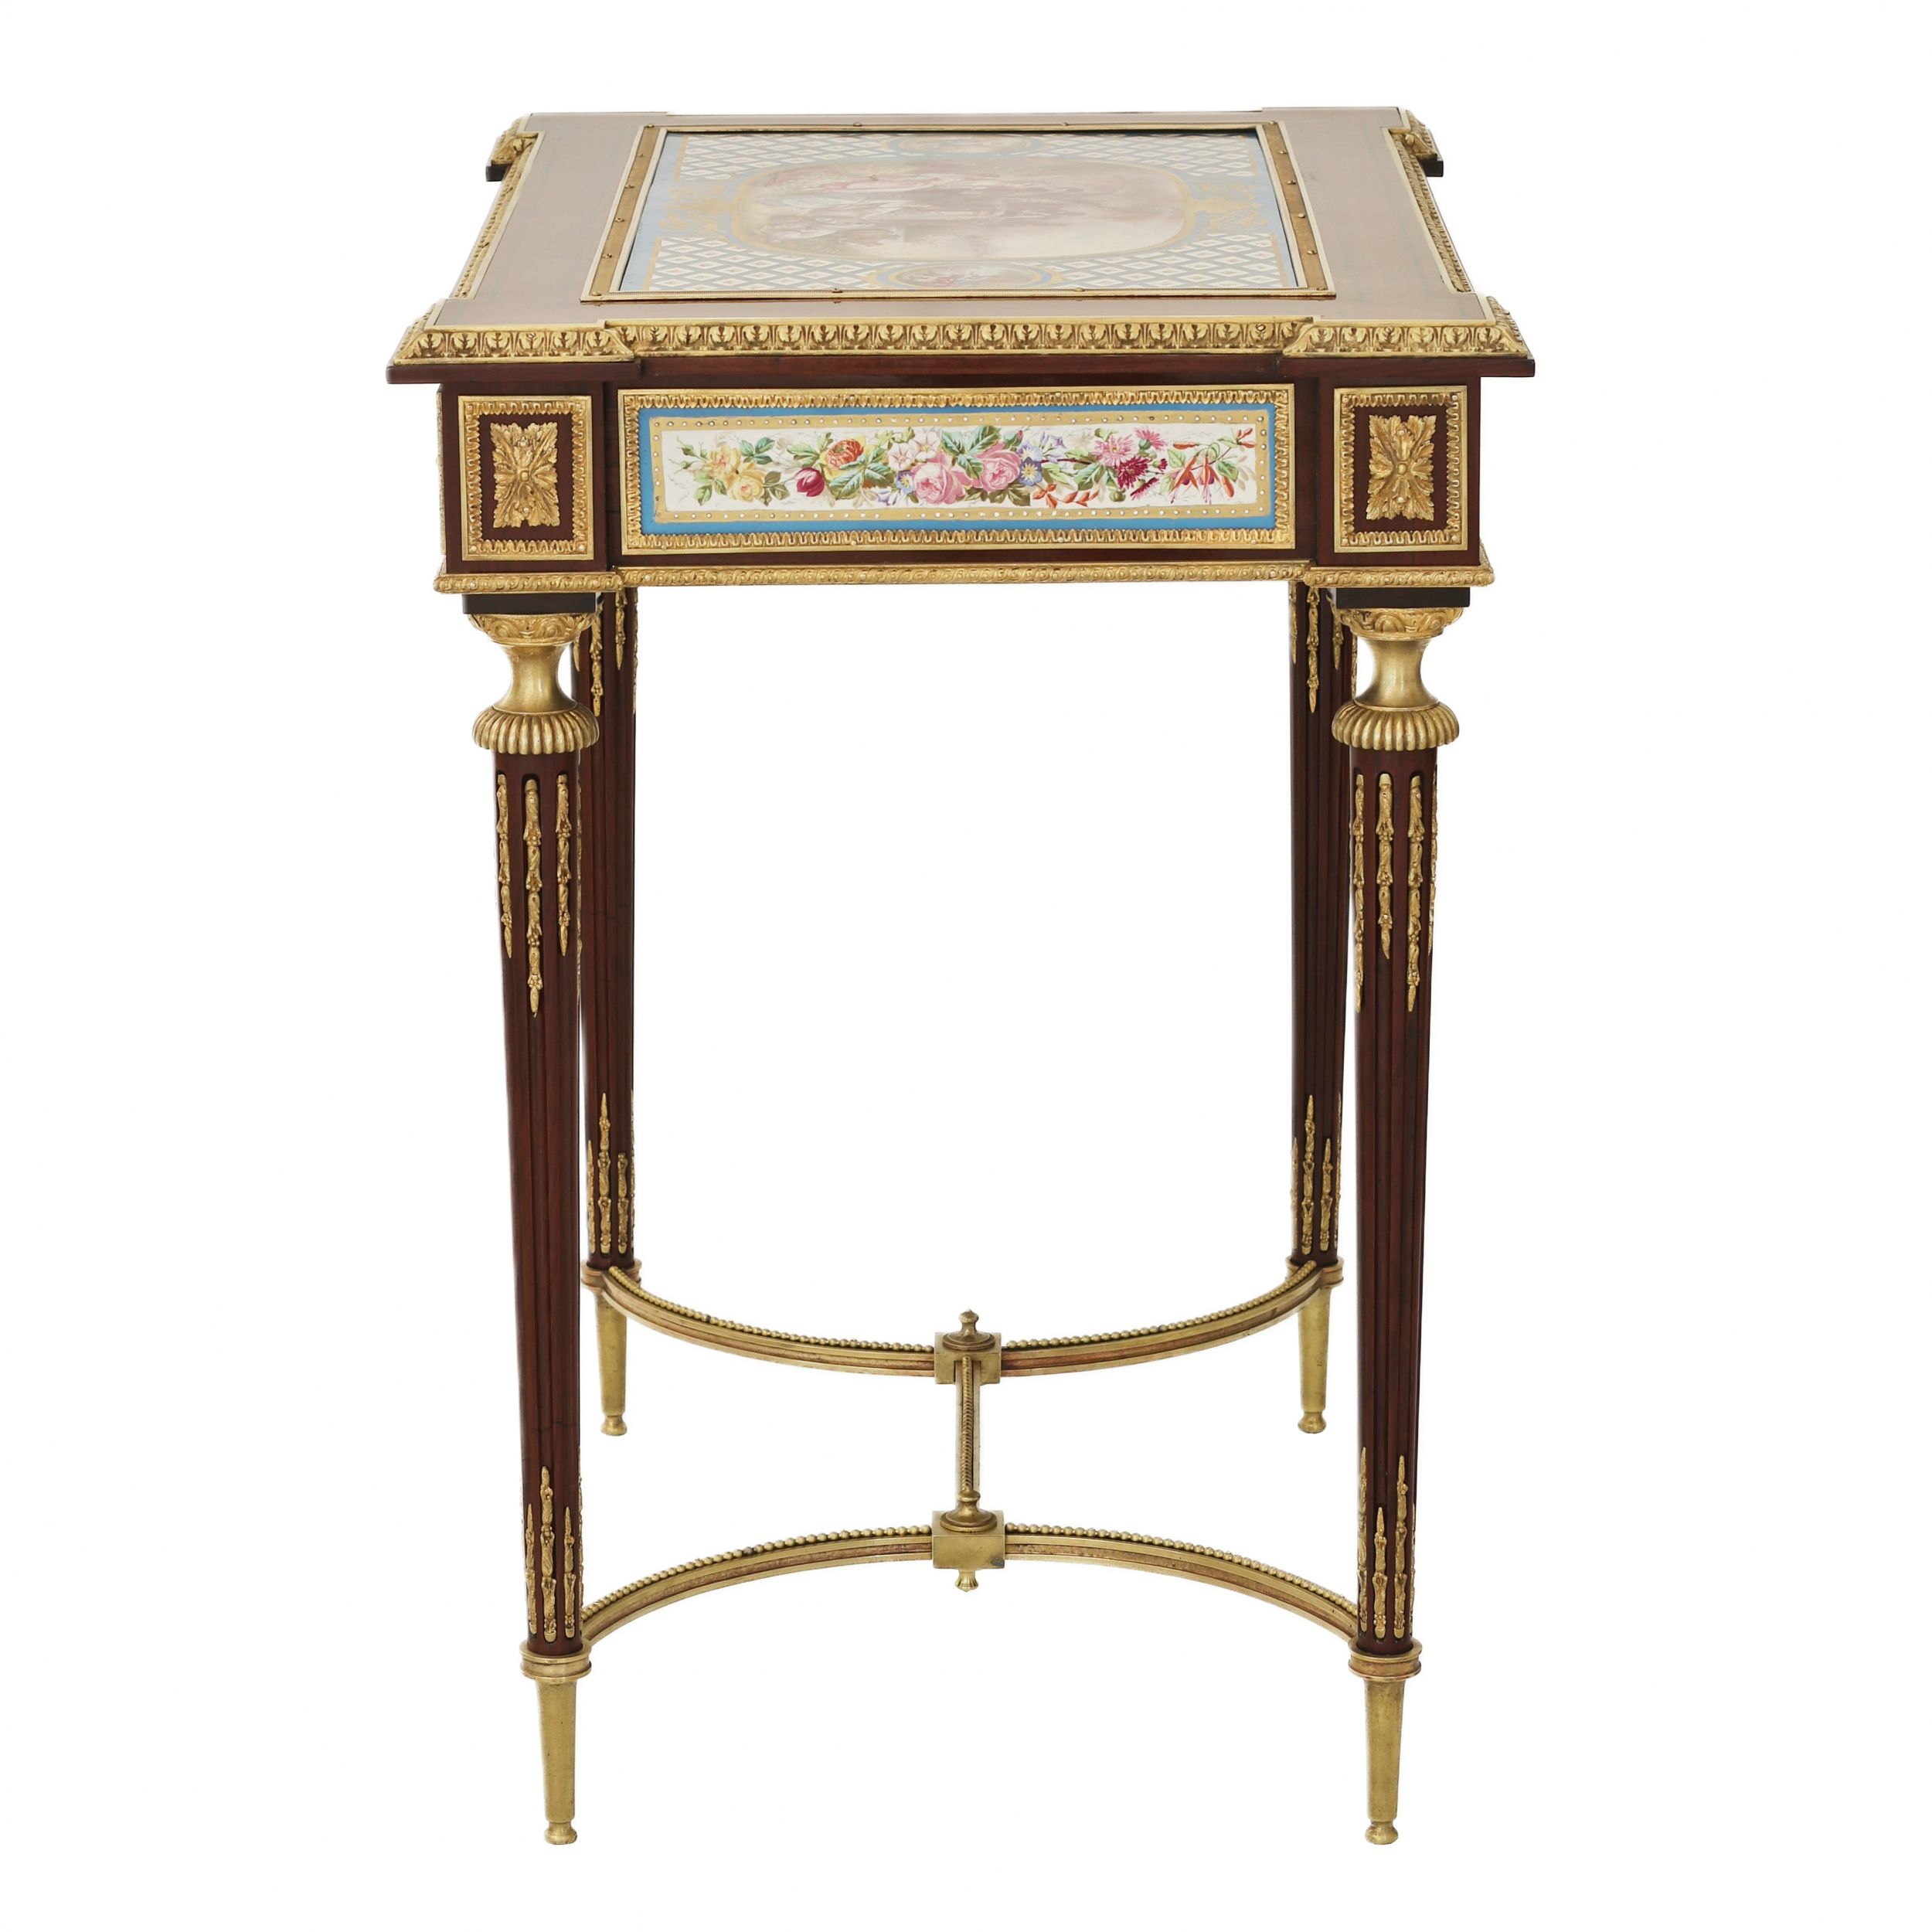 A magnificent ladies table with gilded bronze decor and porcelain panels in the style of Adam Weiswe - Image 5 of 12